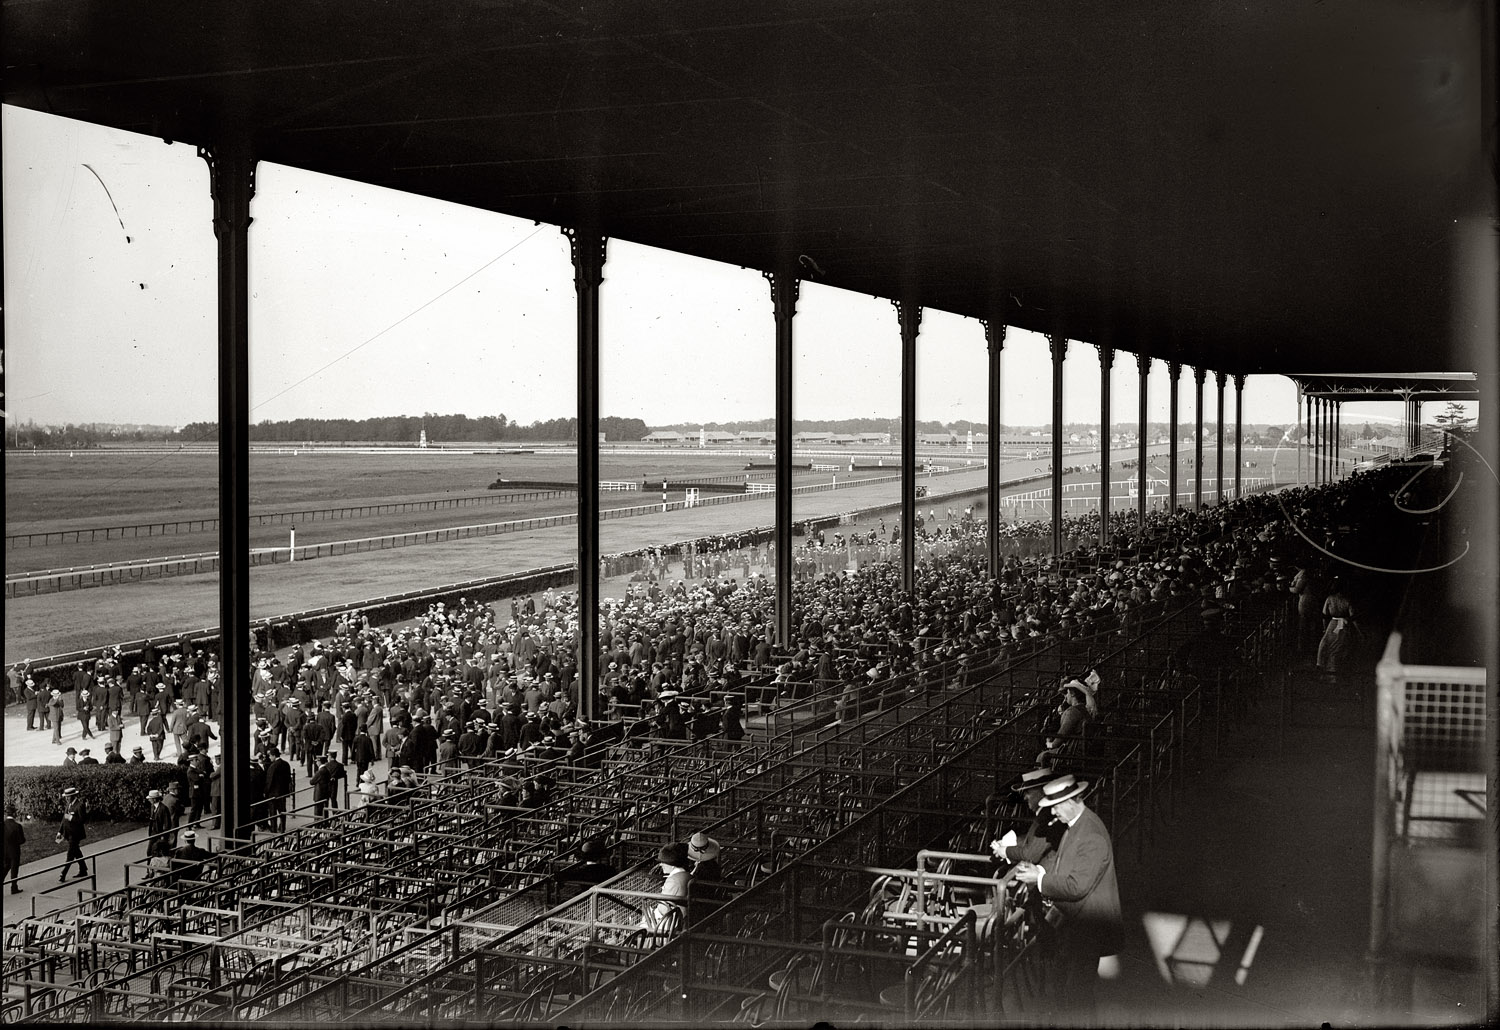 June 1913. Grandstand at Belmont Park. View full size. G.G. Bain Collection.